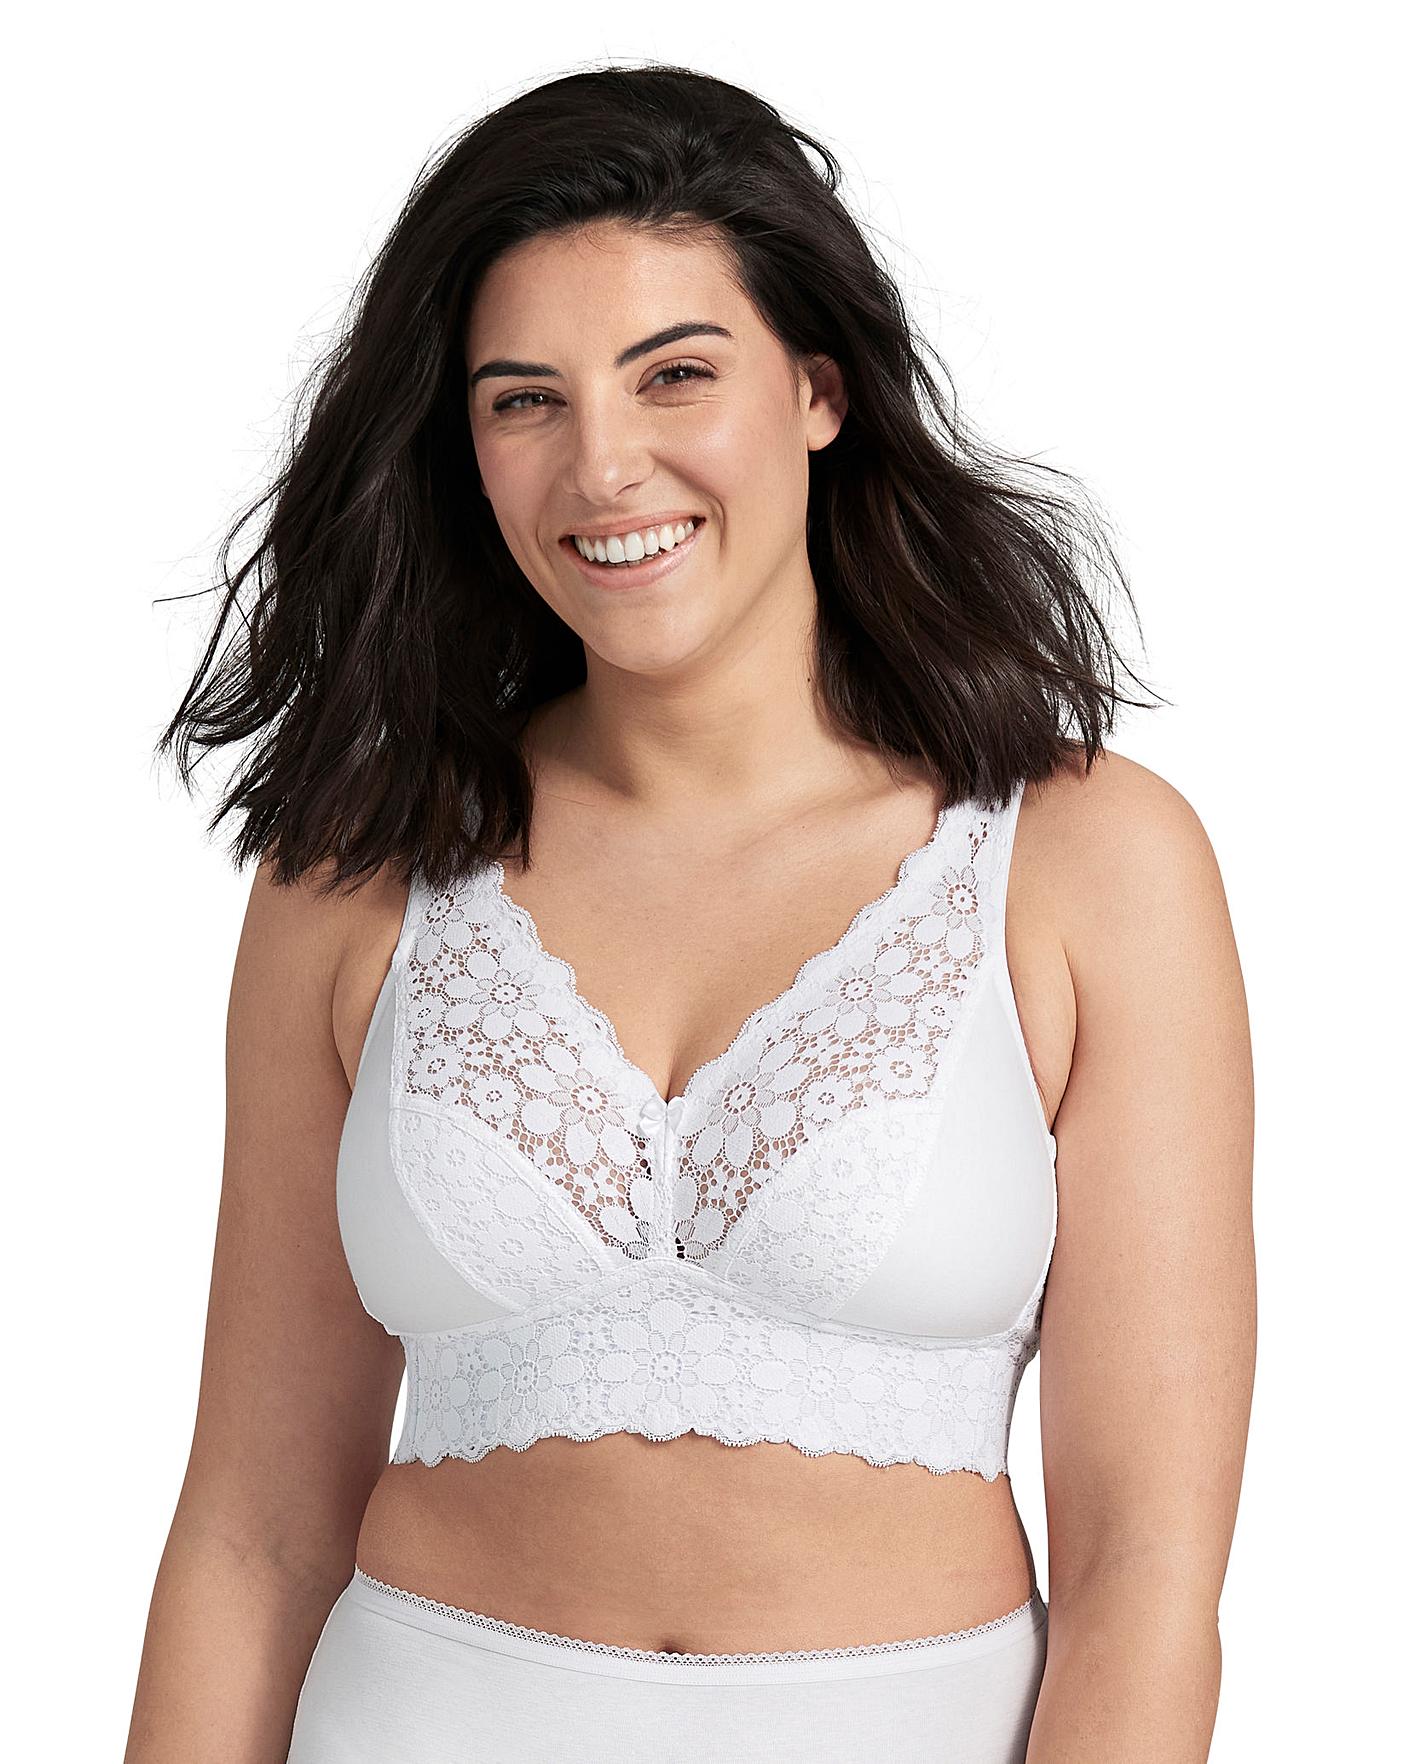 Lace Dreams Non-wired Bra by Miss Mary of Sweden